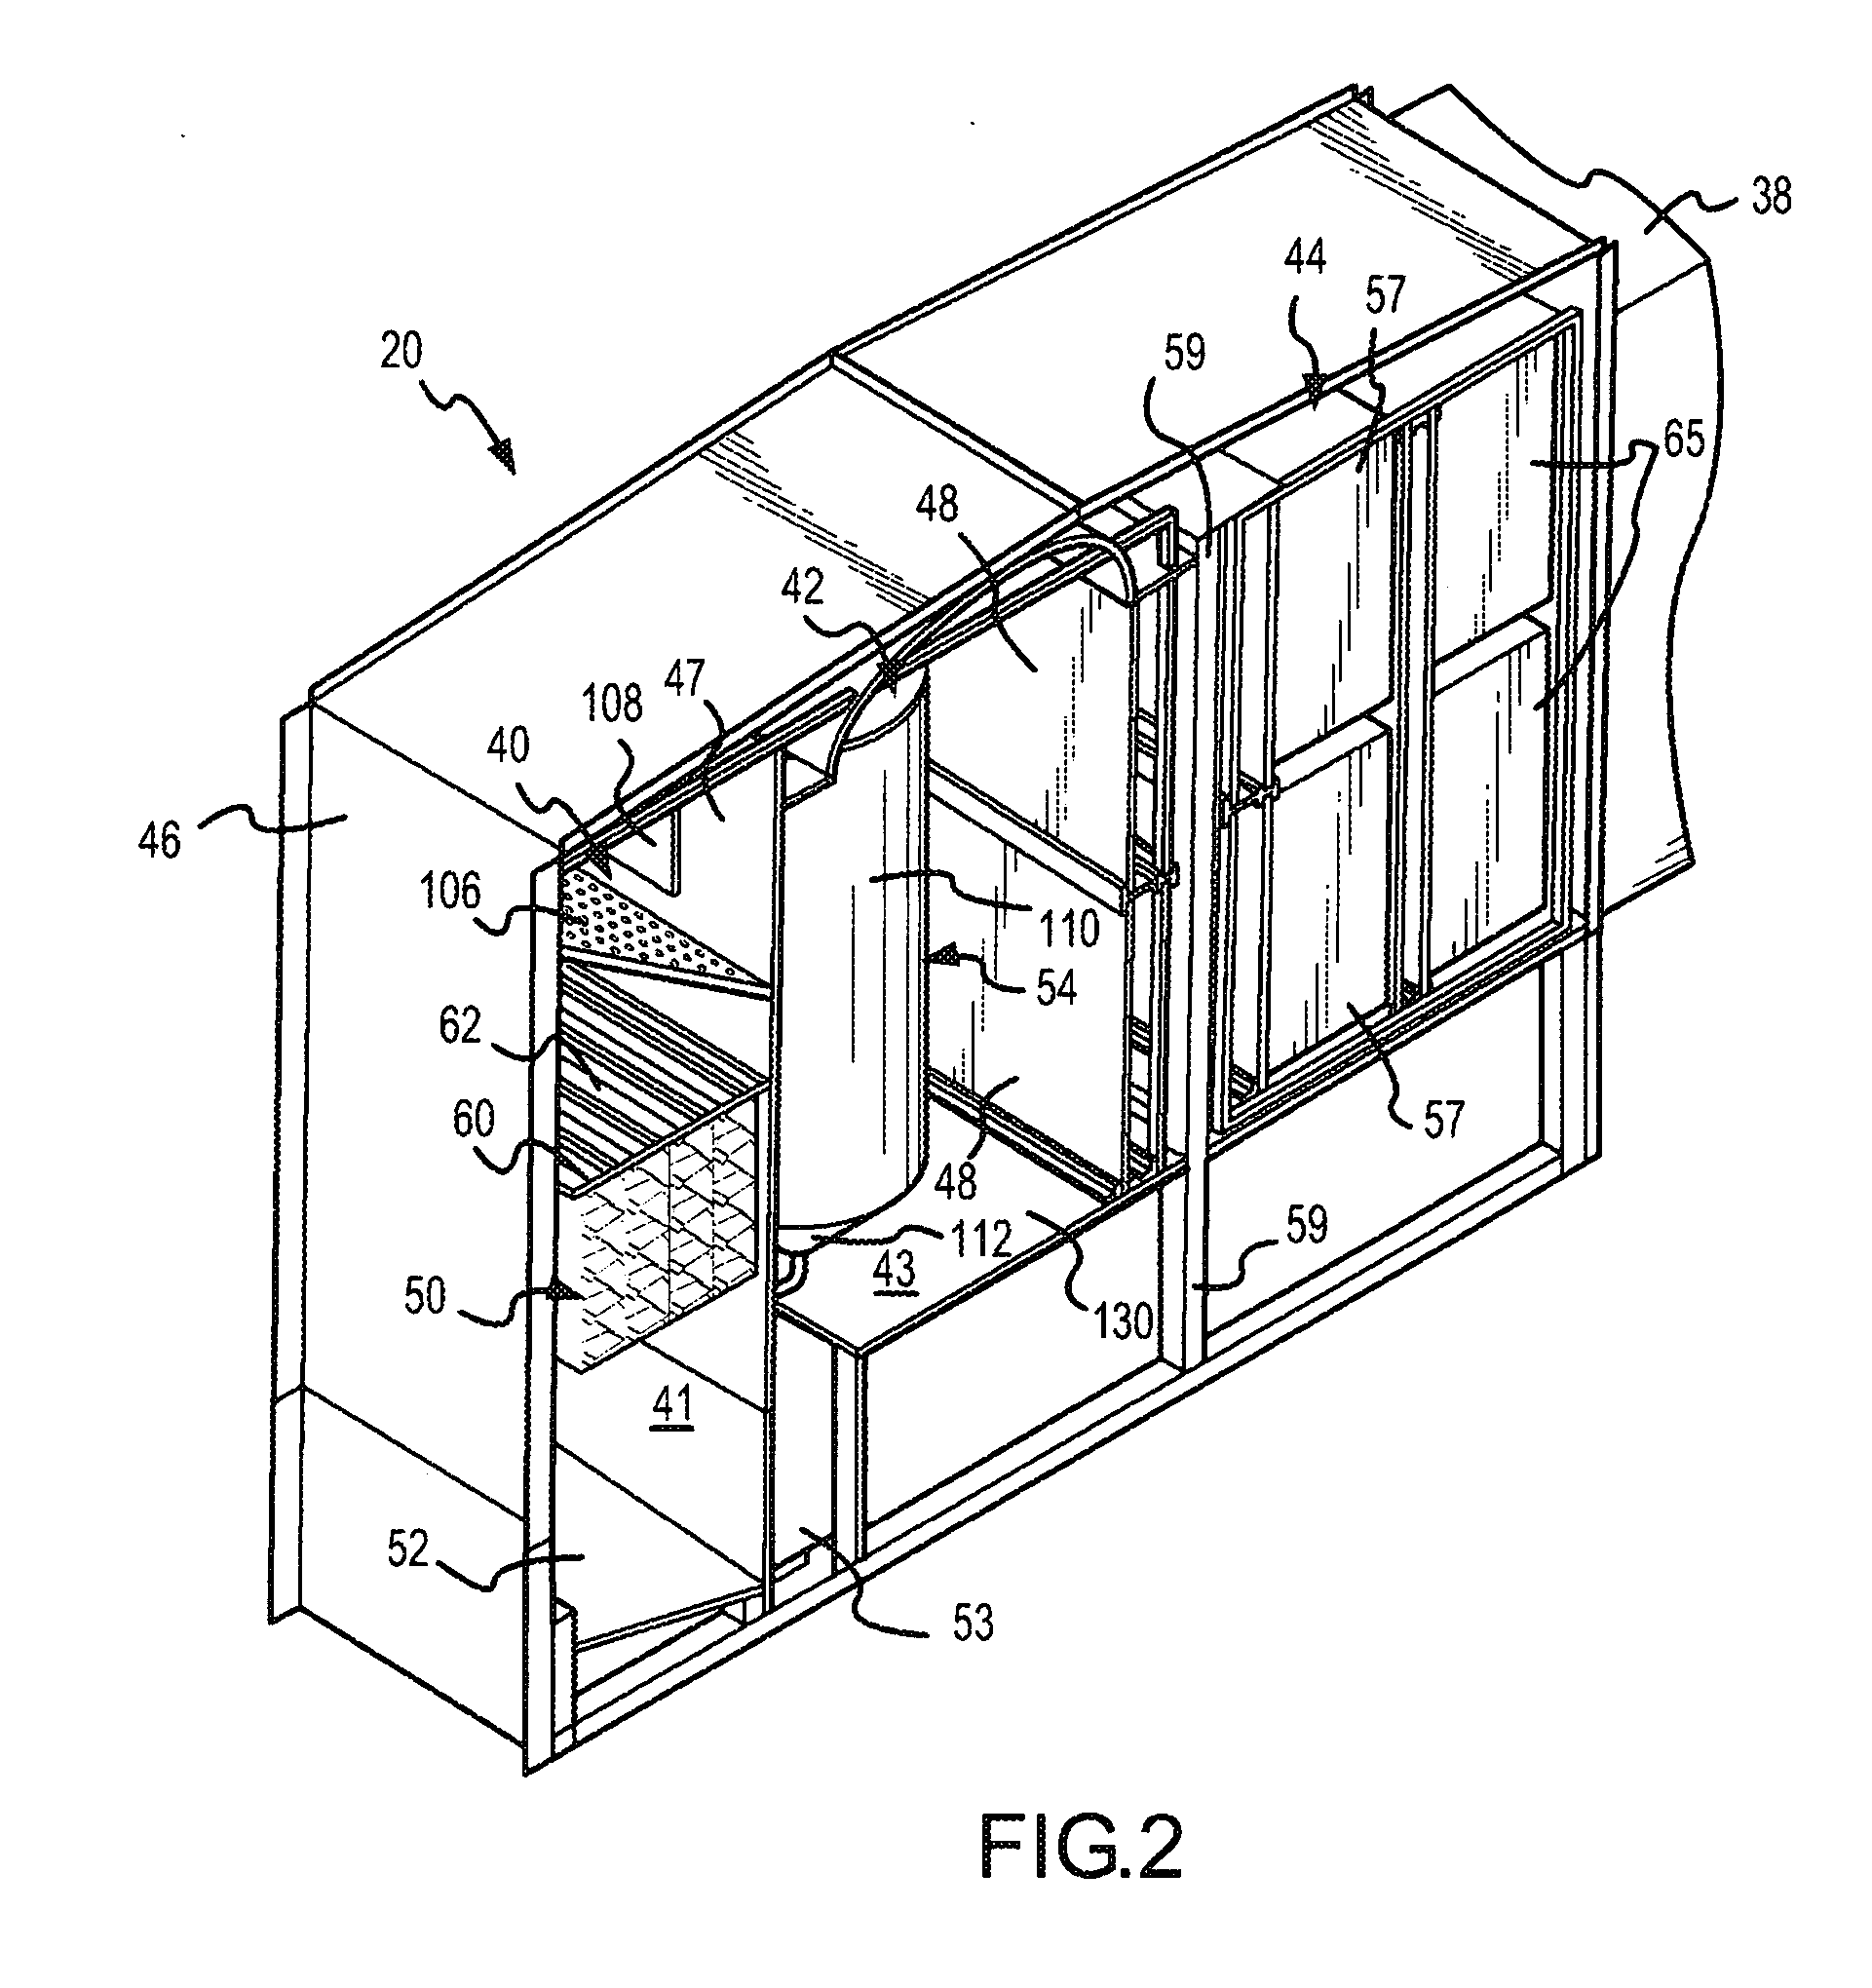 Apparatus and method for cleaning, neutralizing carbon monoxide and recirculating exhaust air in a confined environment